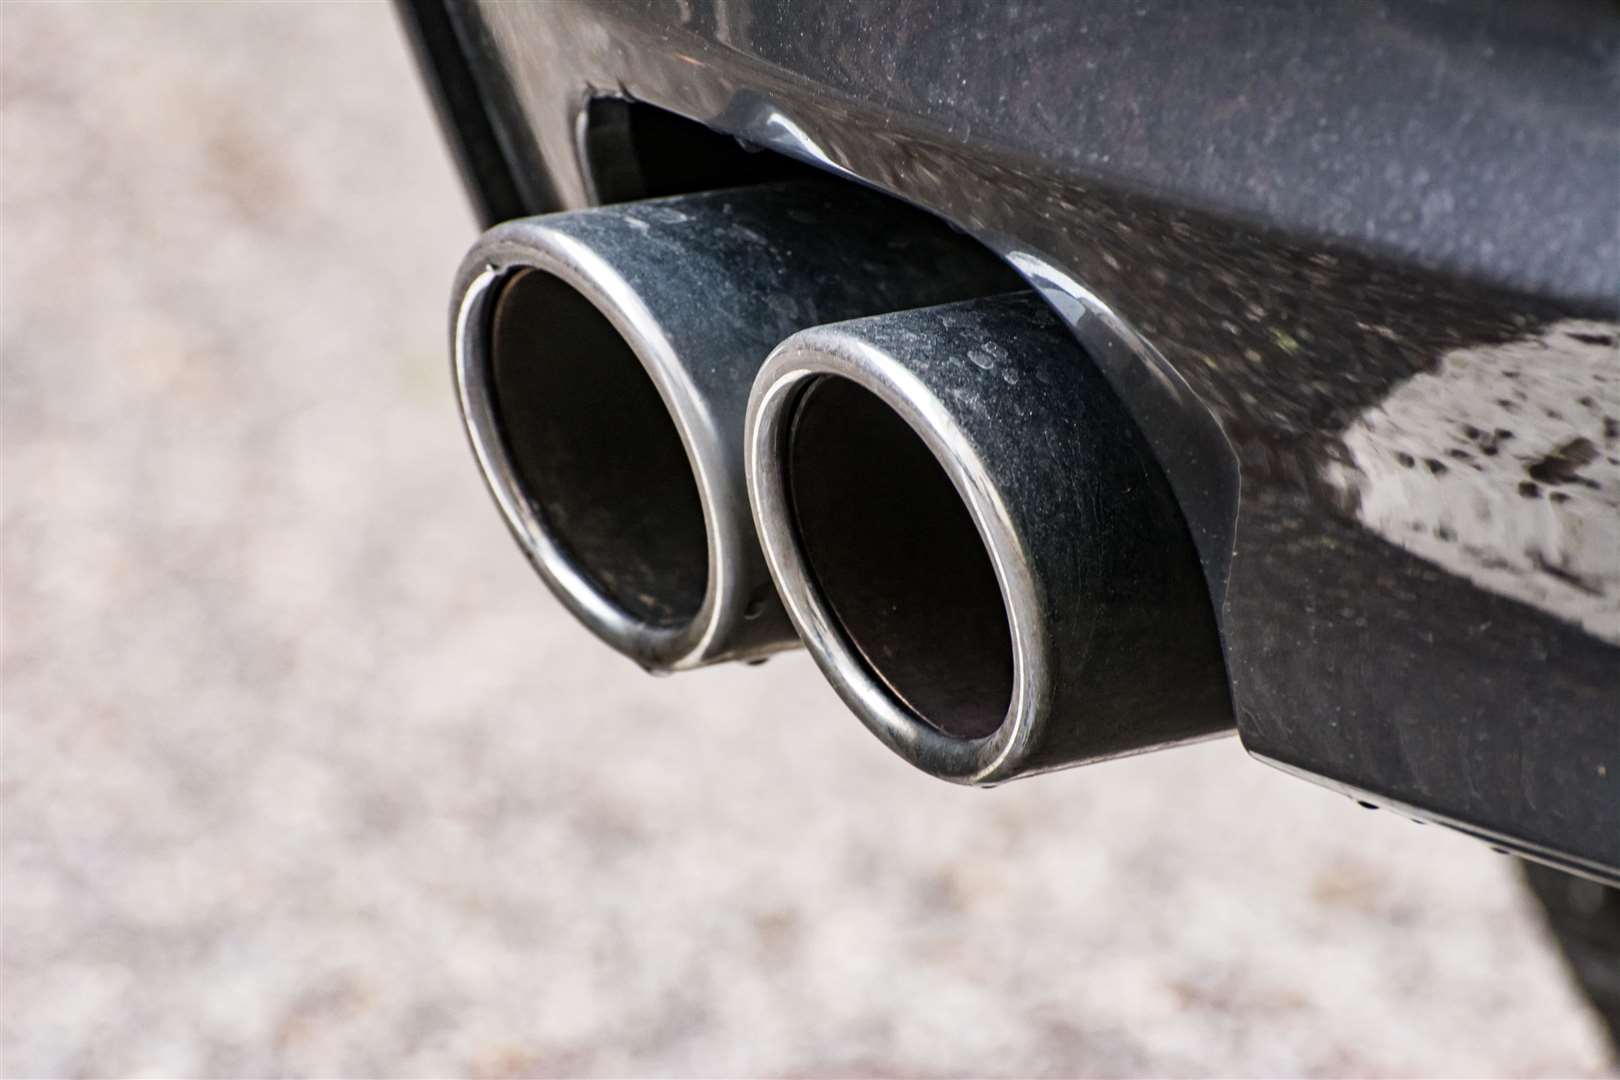 Mercedes-Benz is facing more than 330,000 compensation claims from motorists over allegations it unlawfully fitted ‘defeat devices’ on diesel vehicles to get around emissions tests (Alamy/PA)